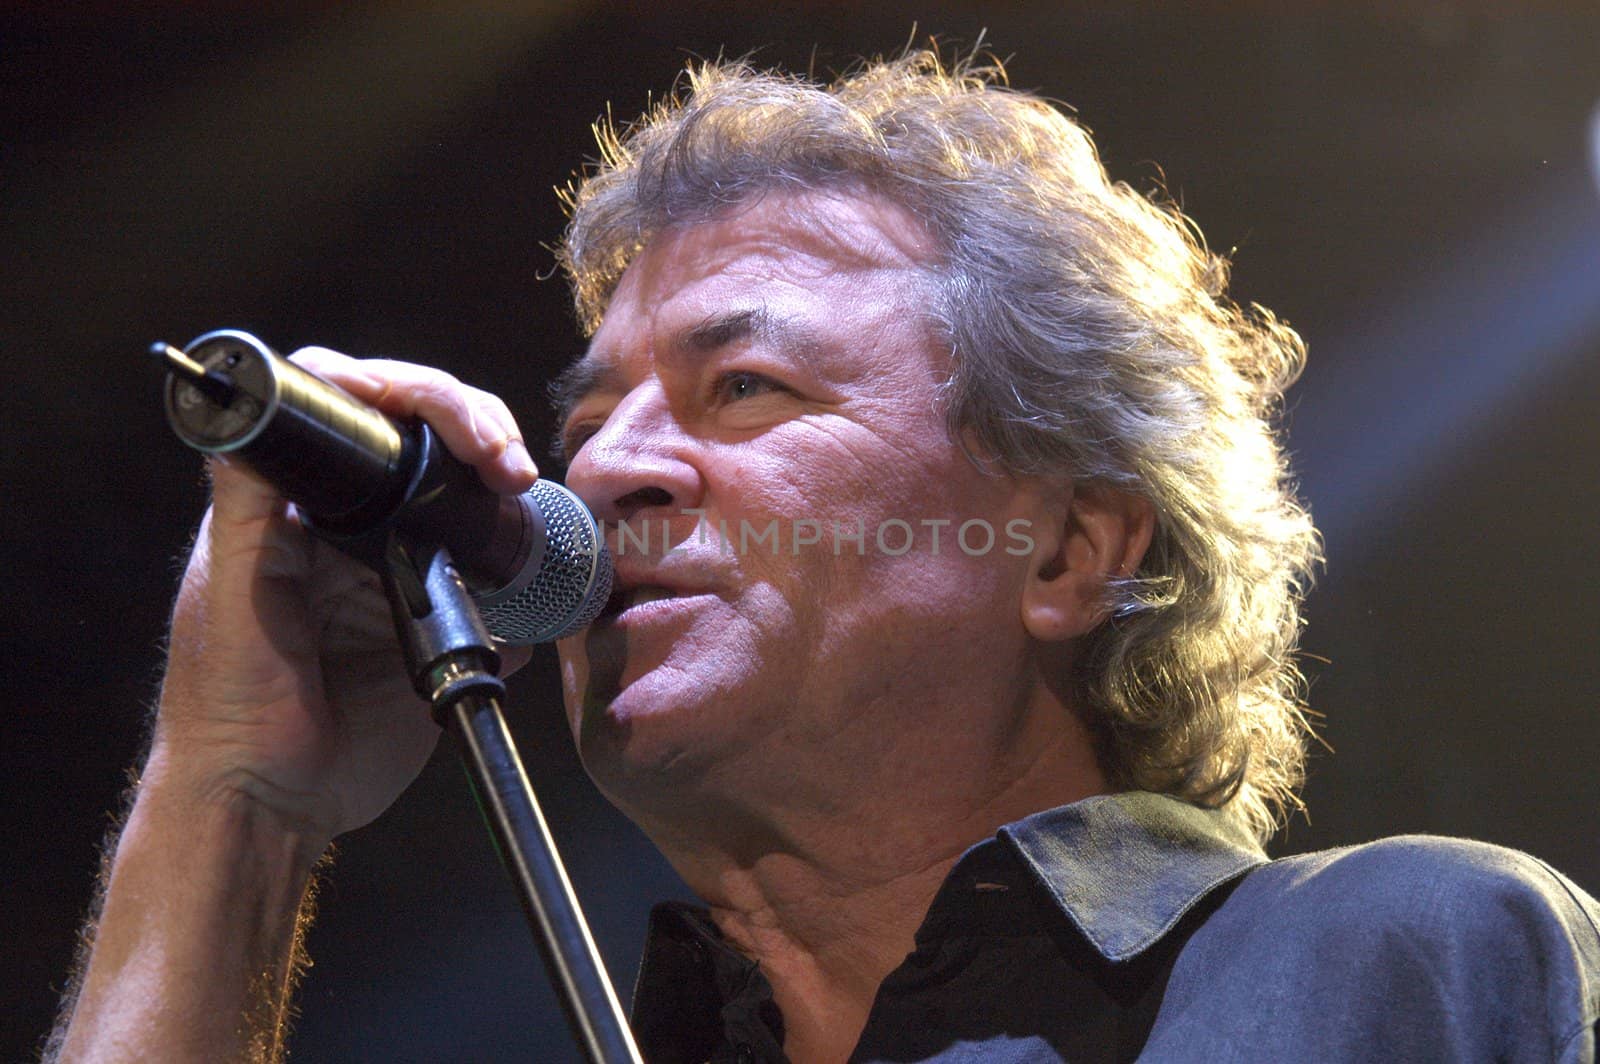 BRNO, CZECH REP., FEBRUARY-22: Ian Gilan, singer of British band Deep Purple in performance at the hall Rondo February 22, 2006 in Brno, Czech Republic. The group arrived as part of tour for the new album Rapture Of The Deep. by haak78